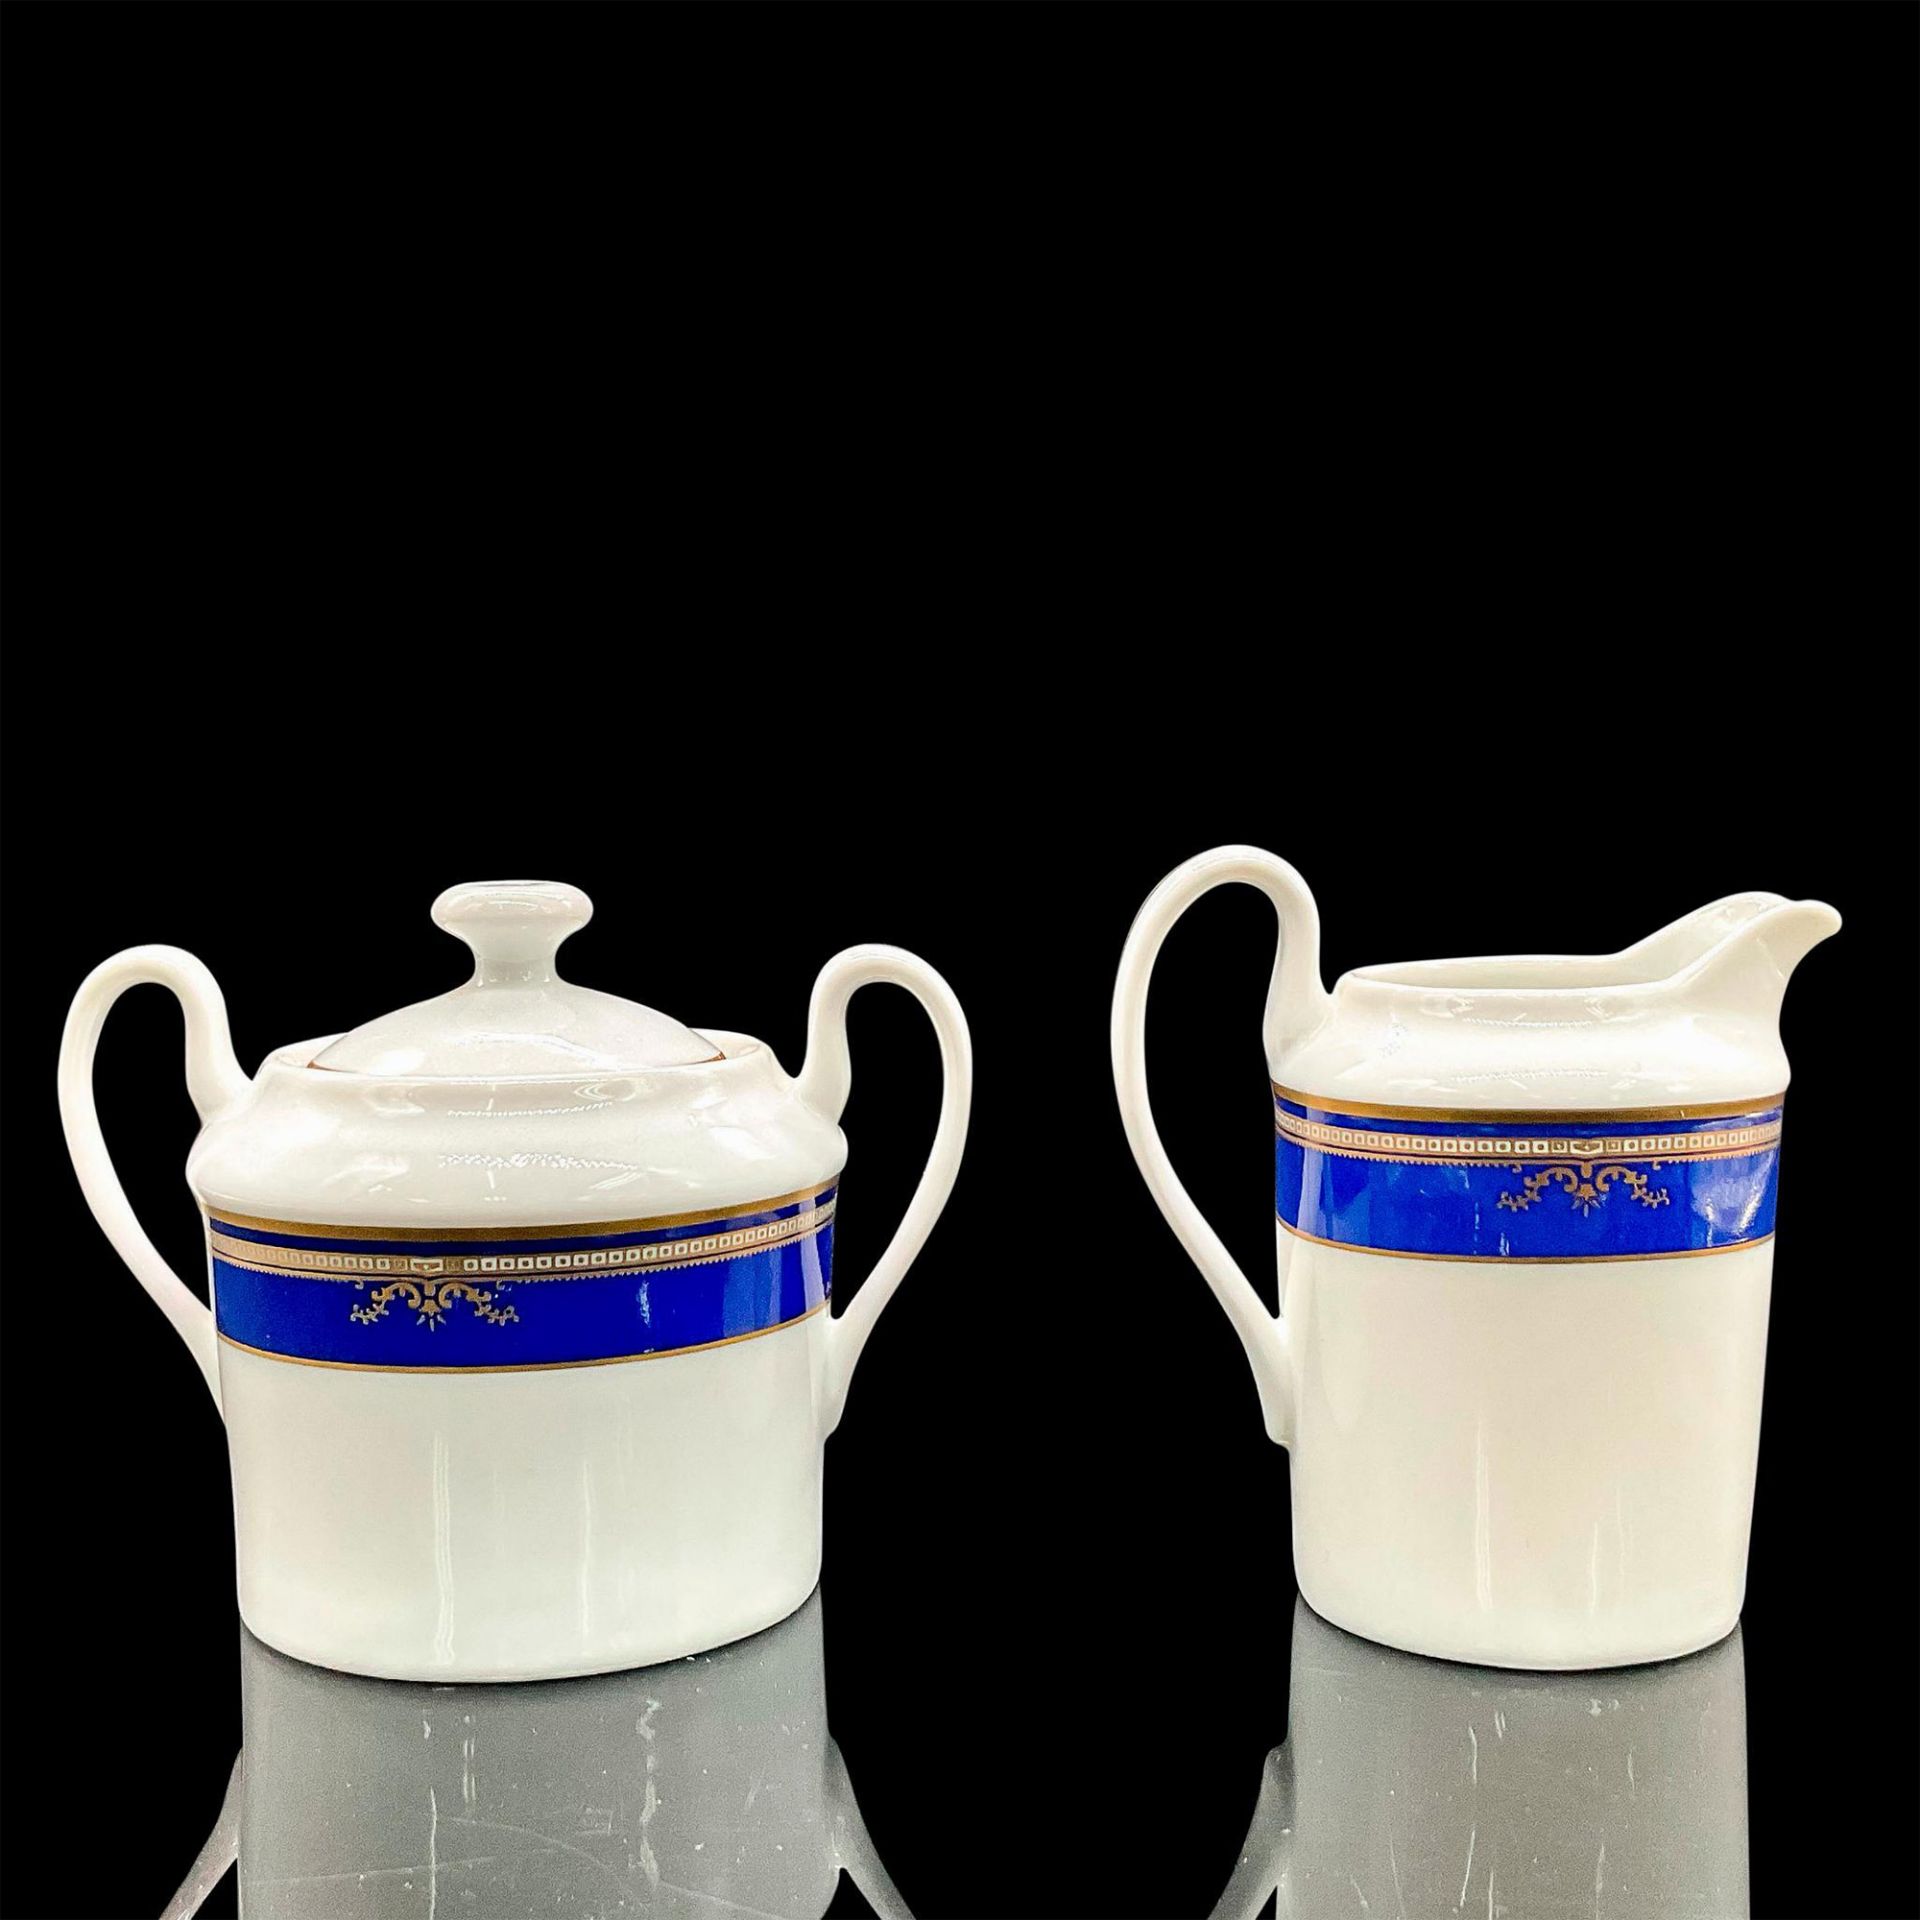 6pc Tea Serving Set, Queen Mary and Titanic Replicas - Image 7 of 16